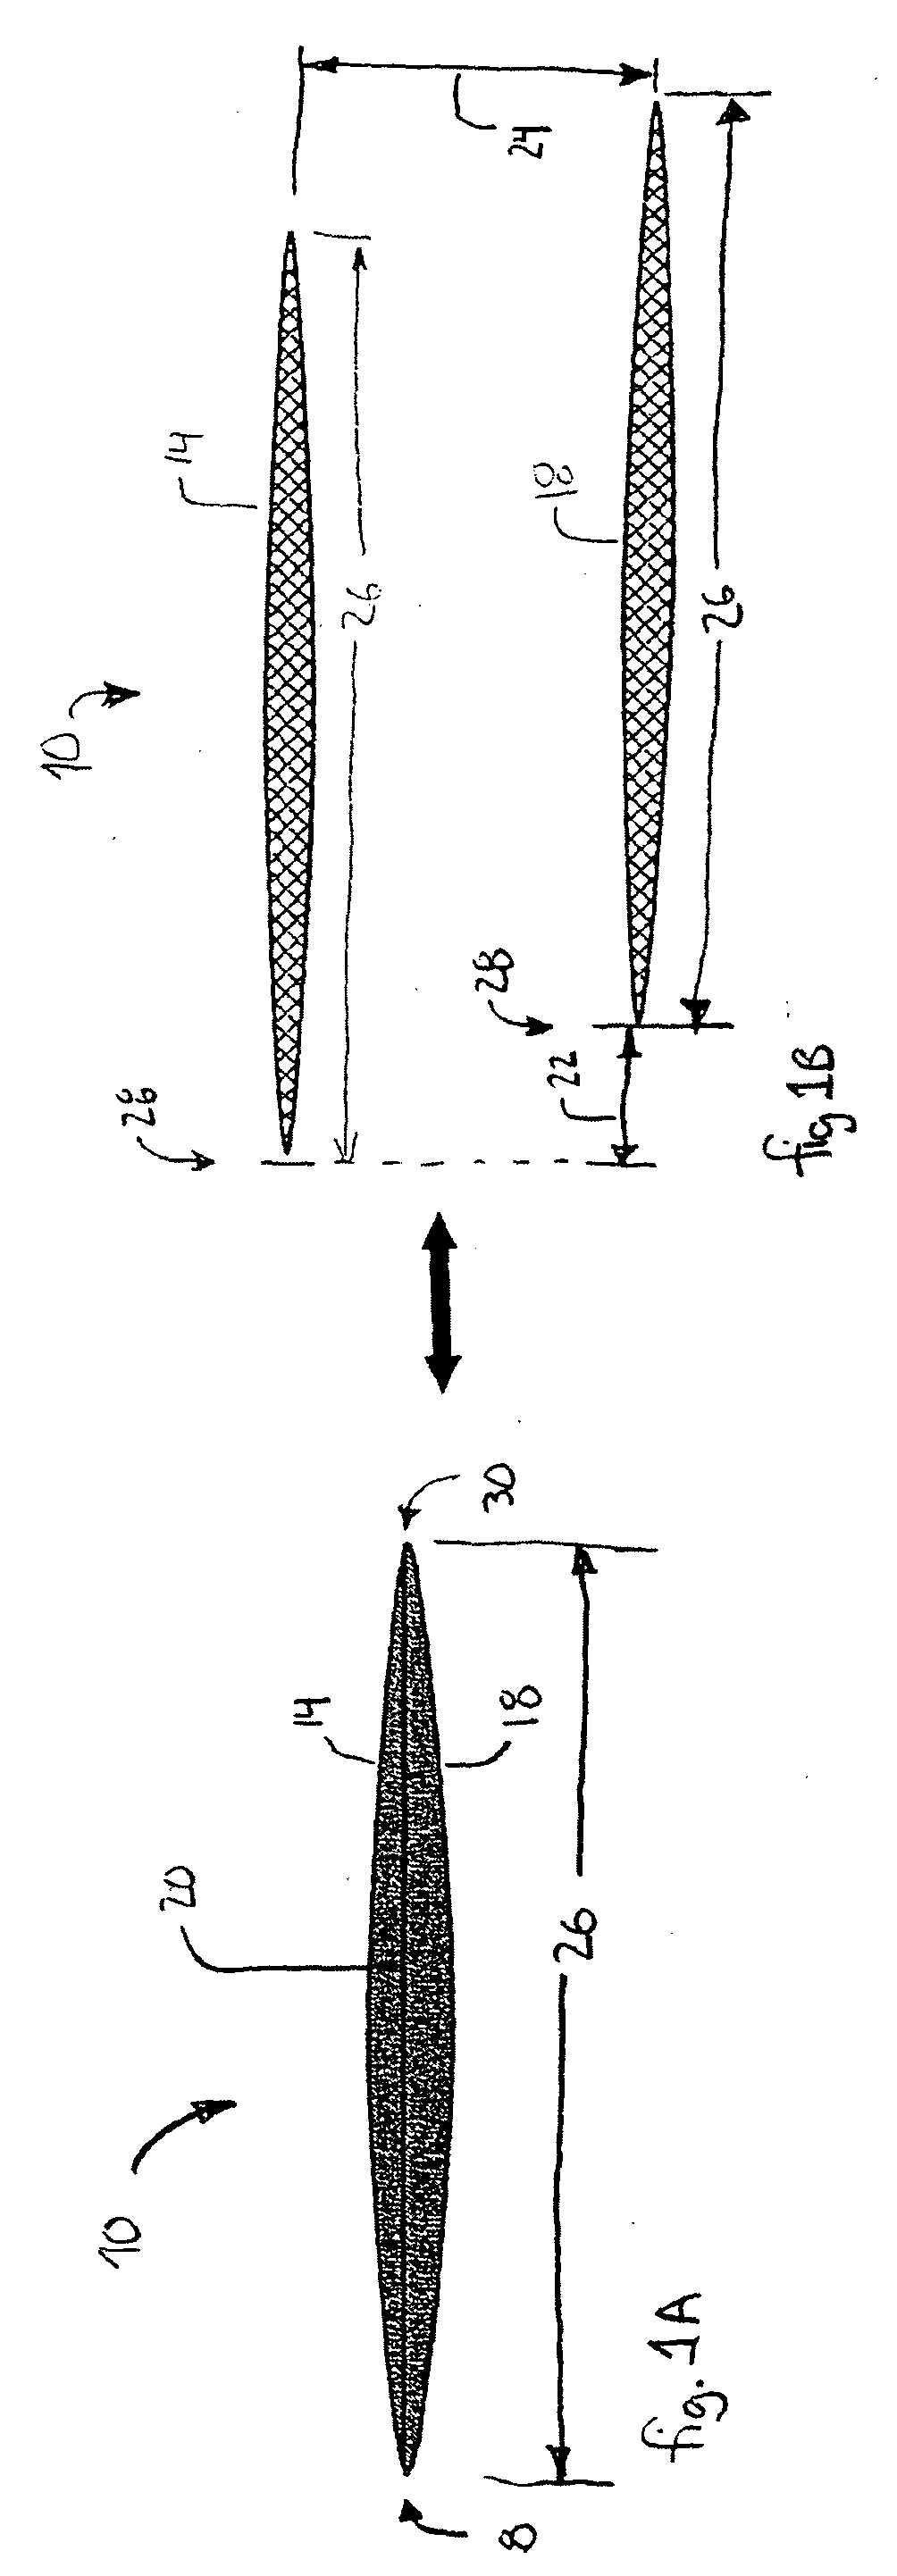 Apparatus for increase of aircraft lift and maneuverability